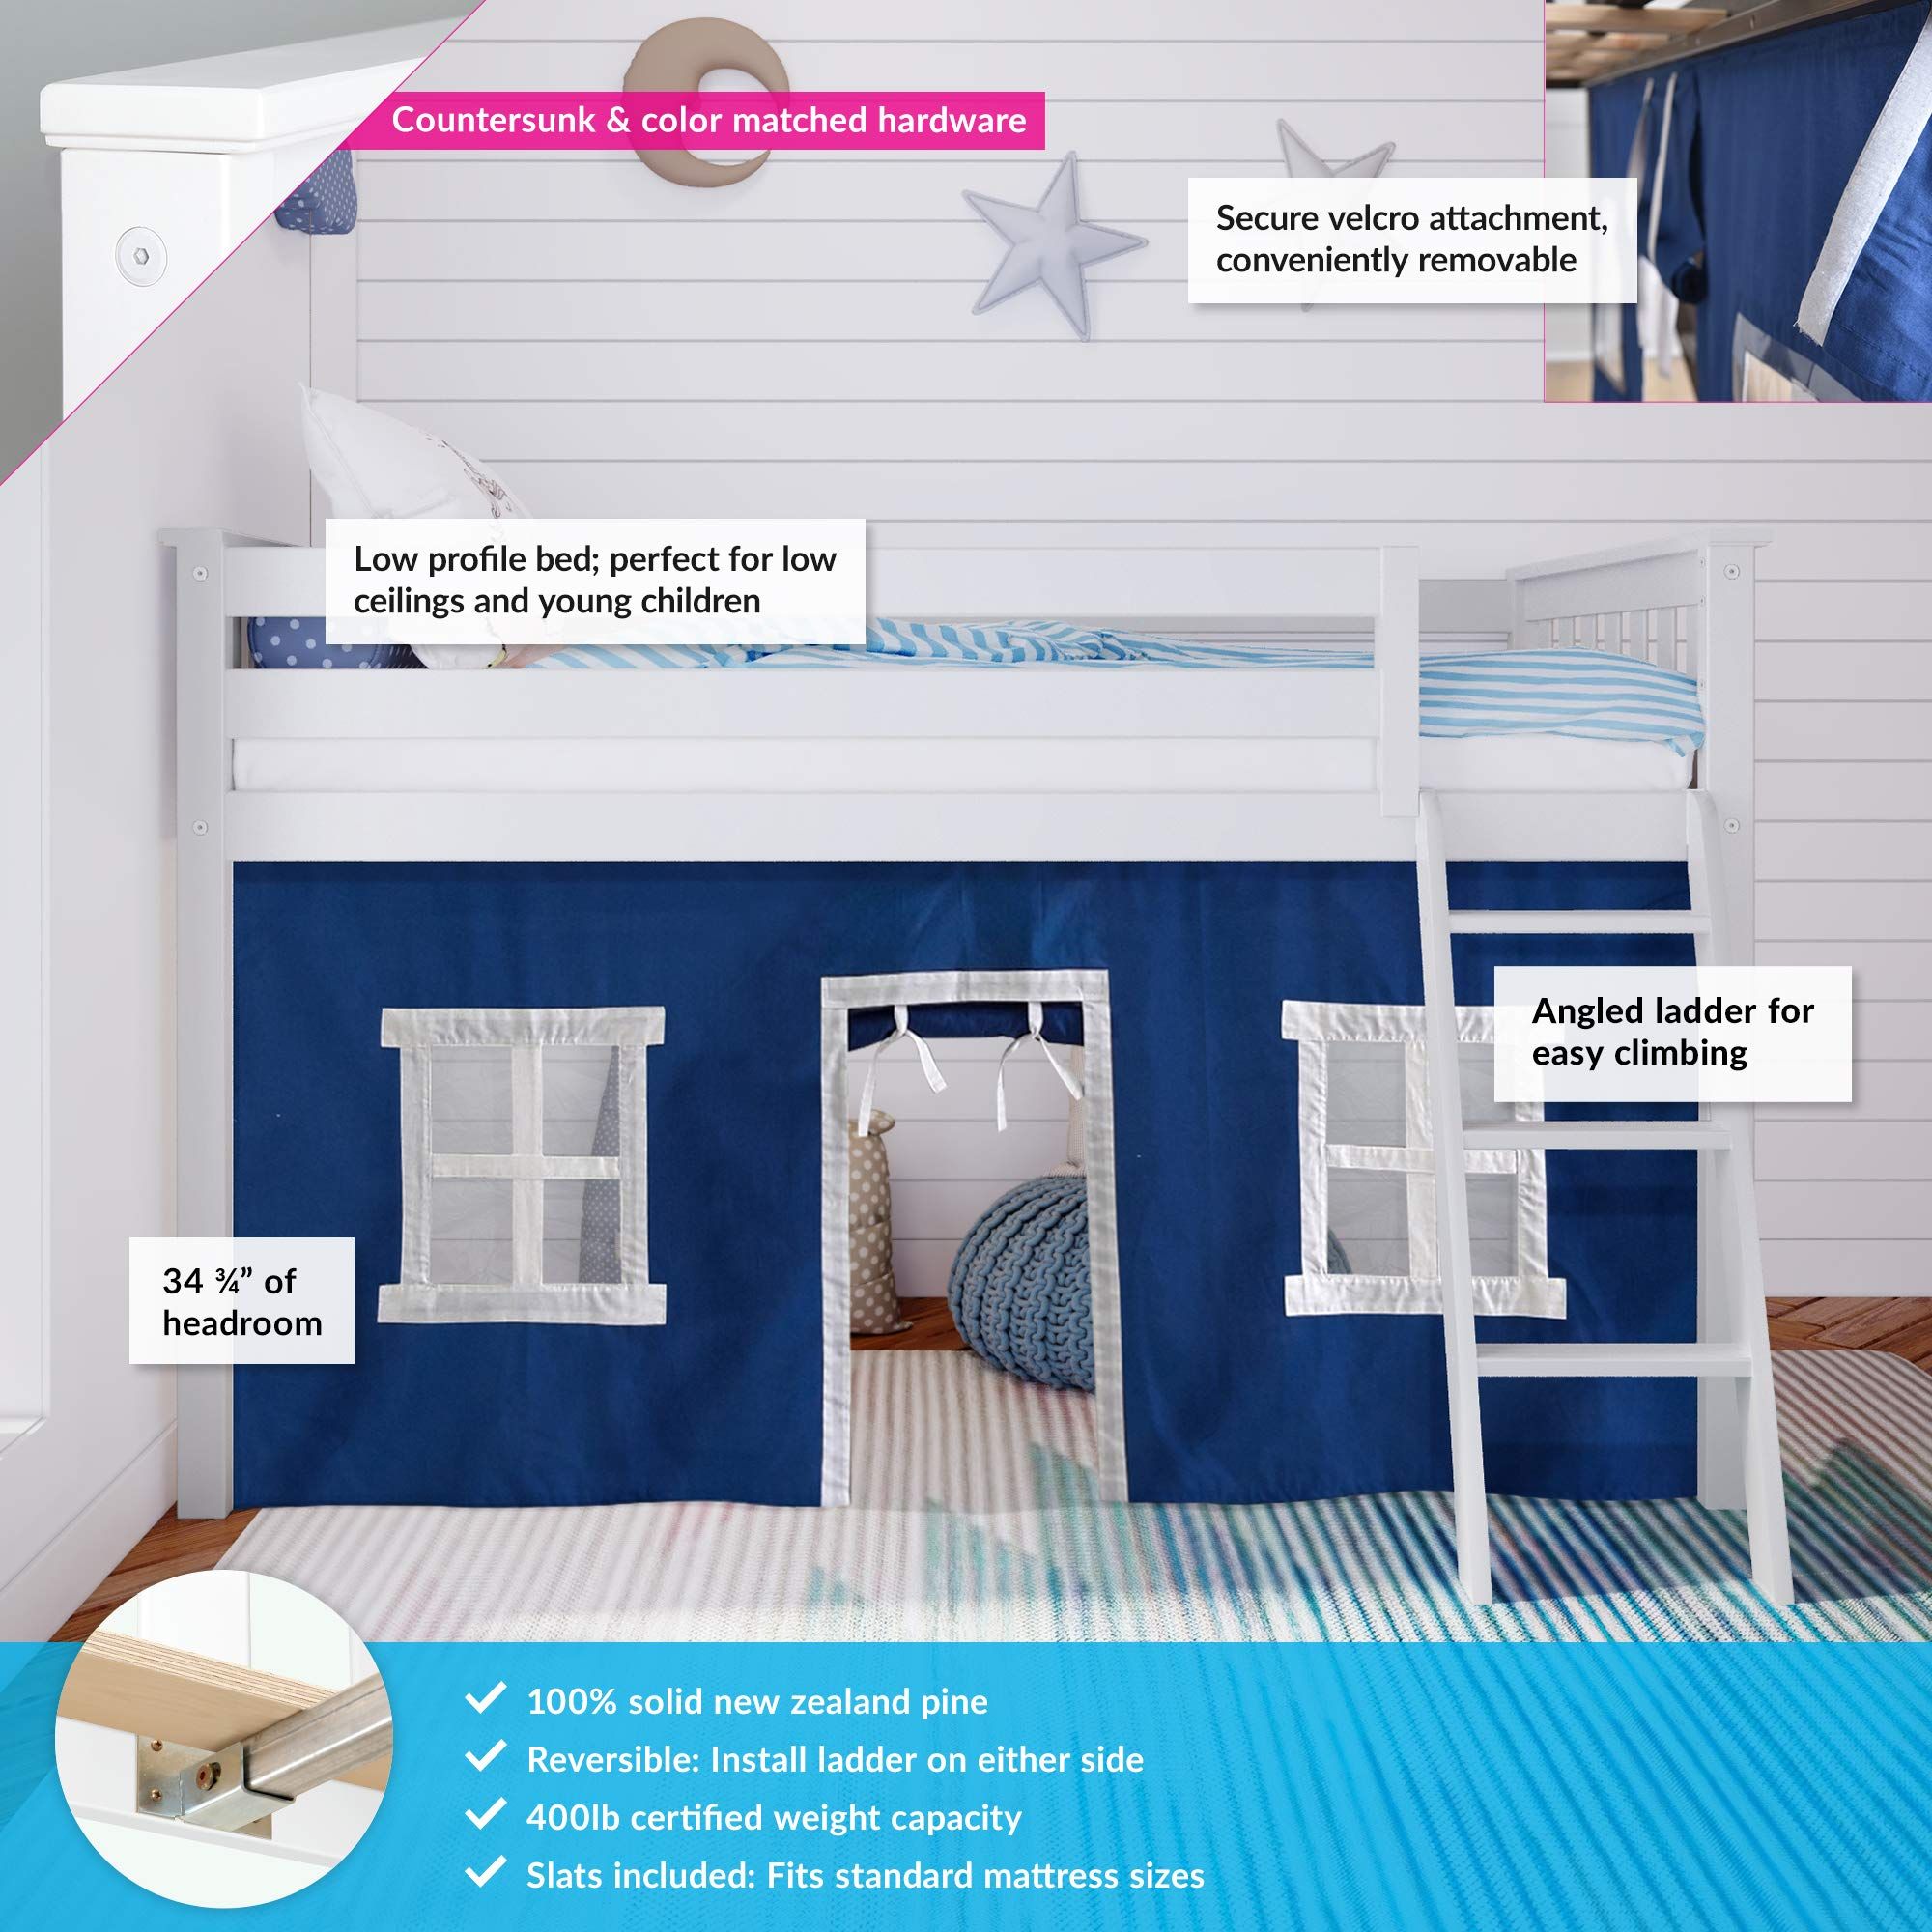 Max & Lily Twin Low Loft Bed with Blue Curtains, White | Amazon (US)